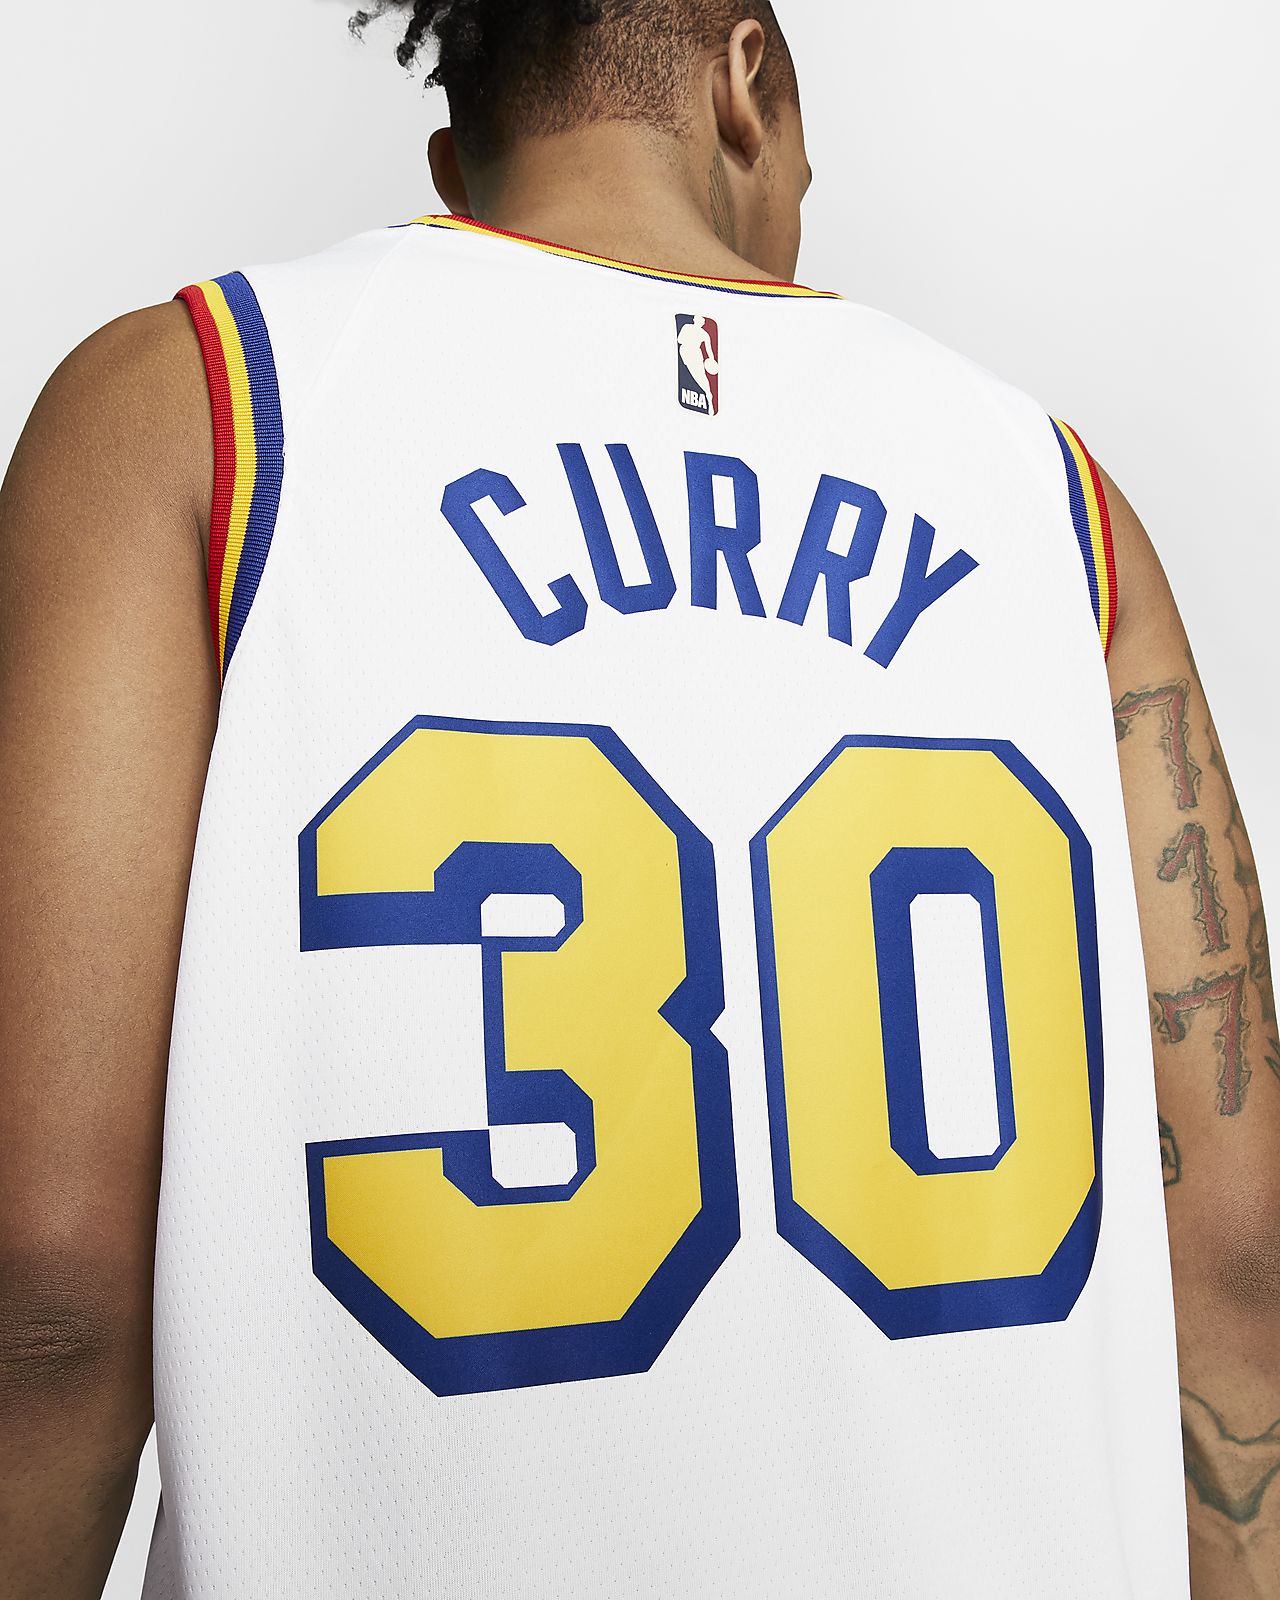 stephen curry number jersey